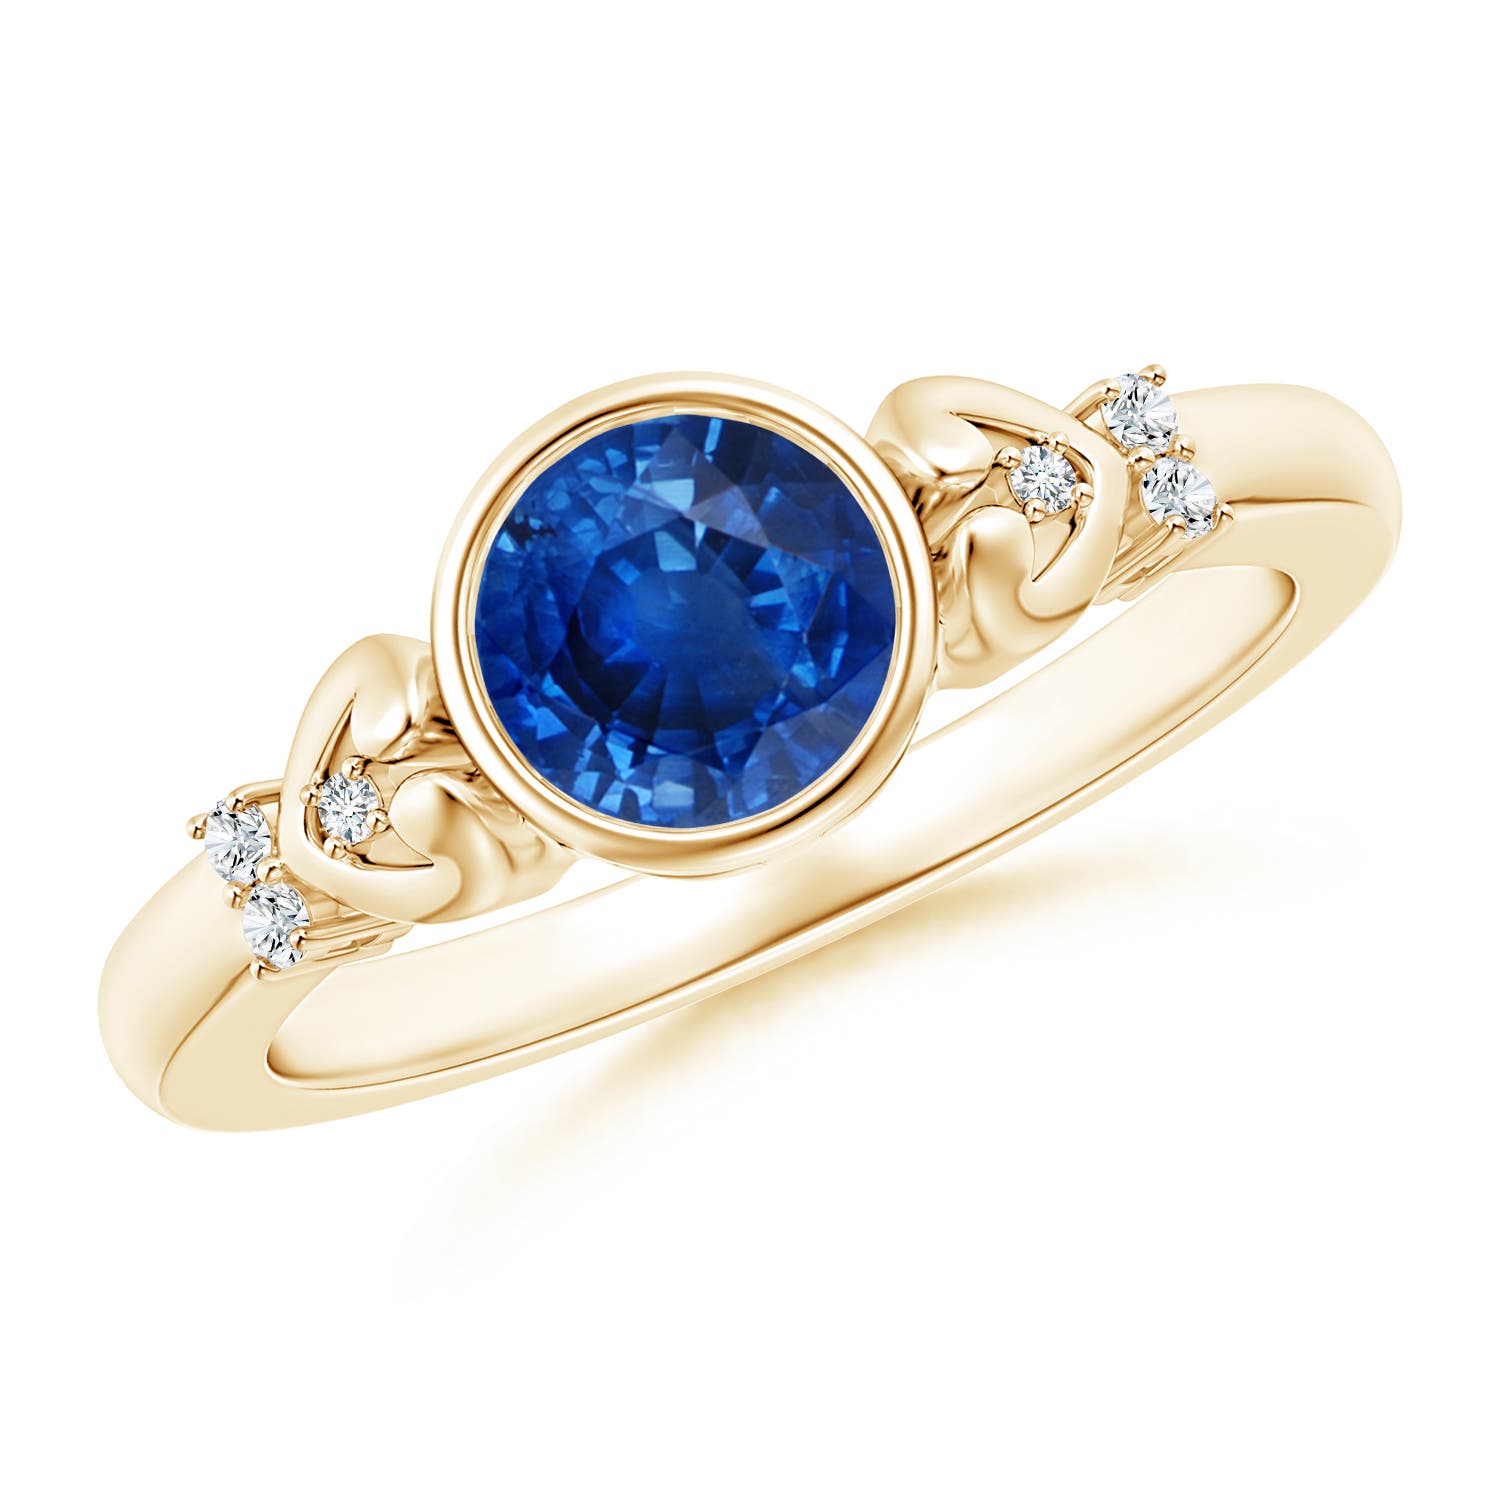 AAA - Blue Sapphire / 1.05 CT / 14 KT Yellow Gold